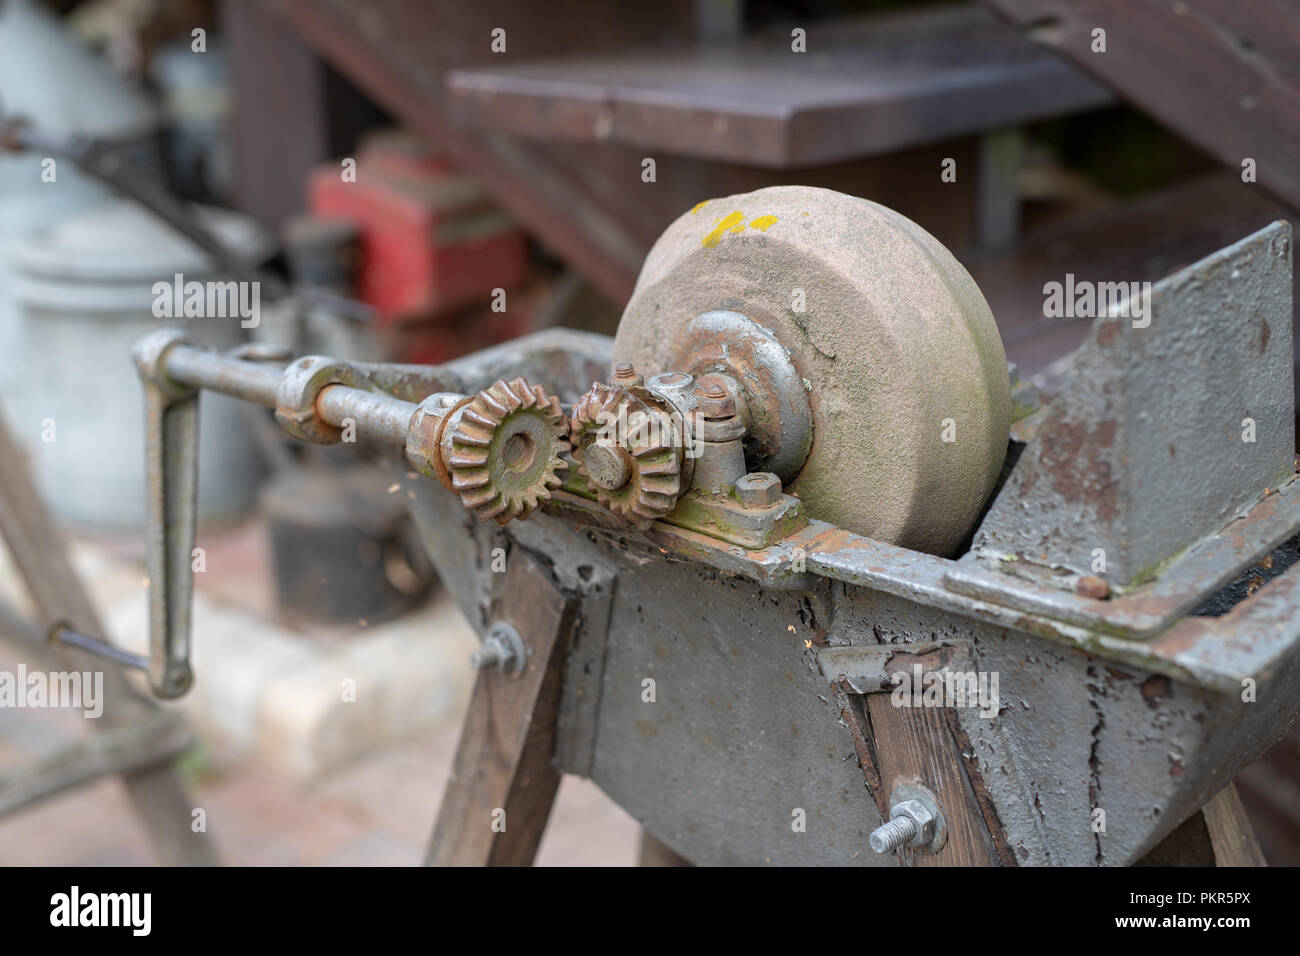 https://c8.alamy.com/comp/PKR5PX/an-old-whetstone-for-sharpening-knives-grinding-wheel-on-an-old-tripod-season-of-the-autumn-PKR5PX.jpg